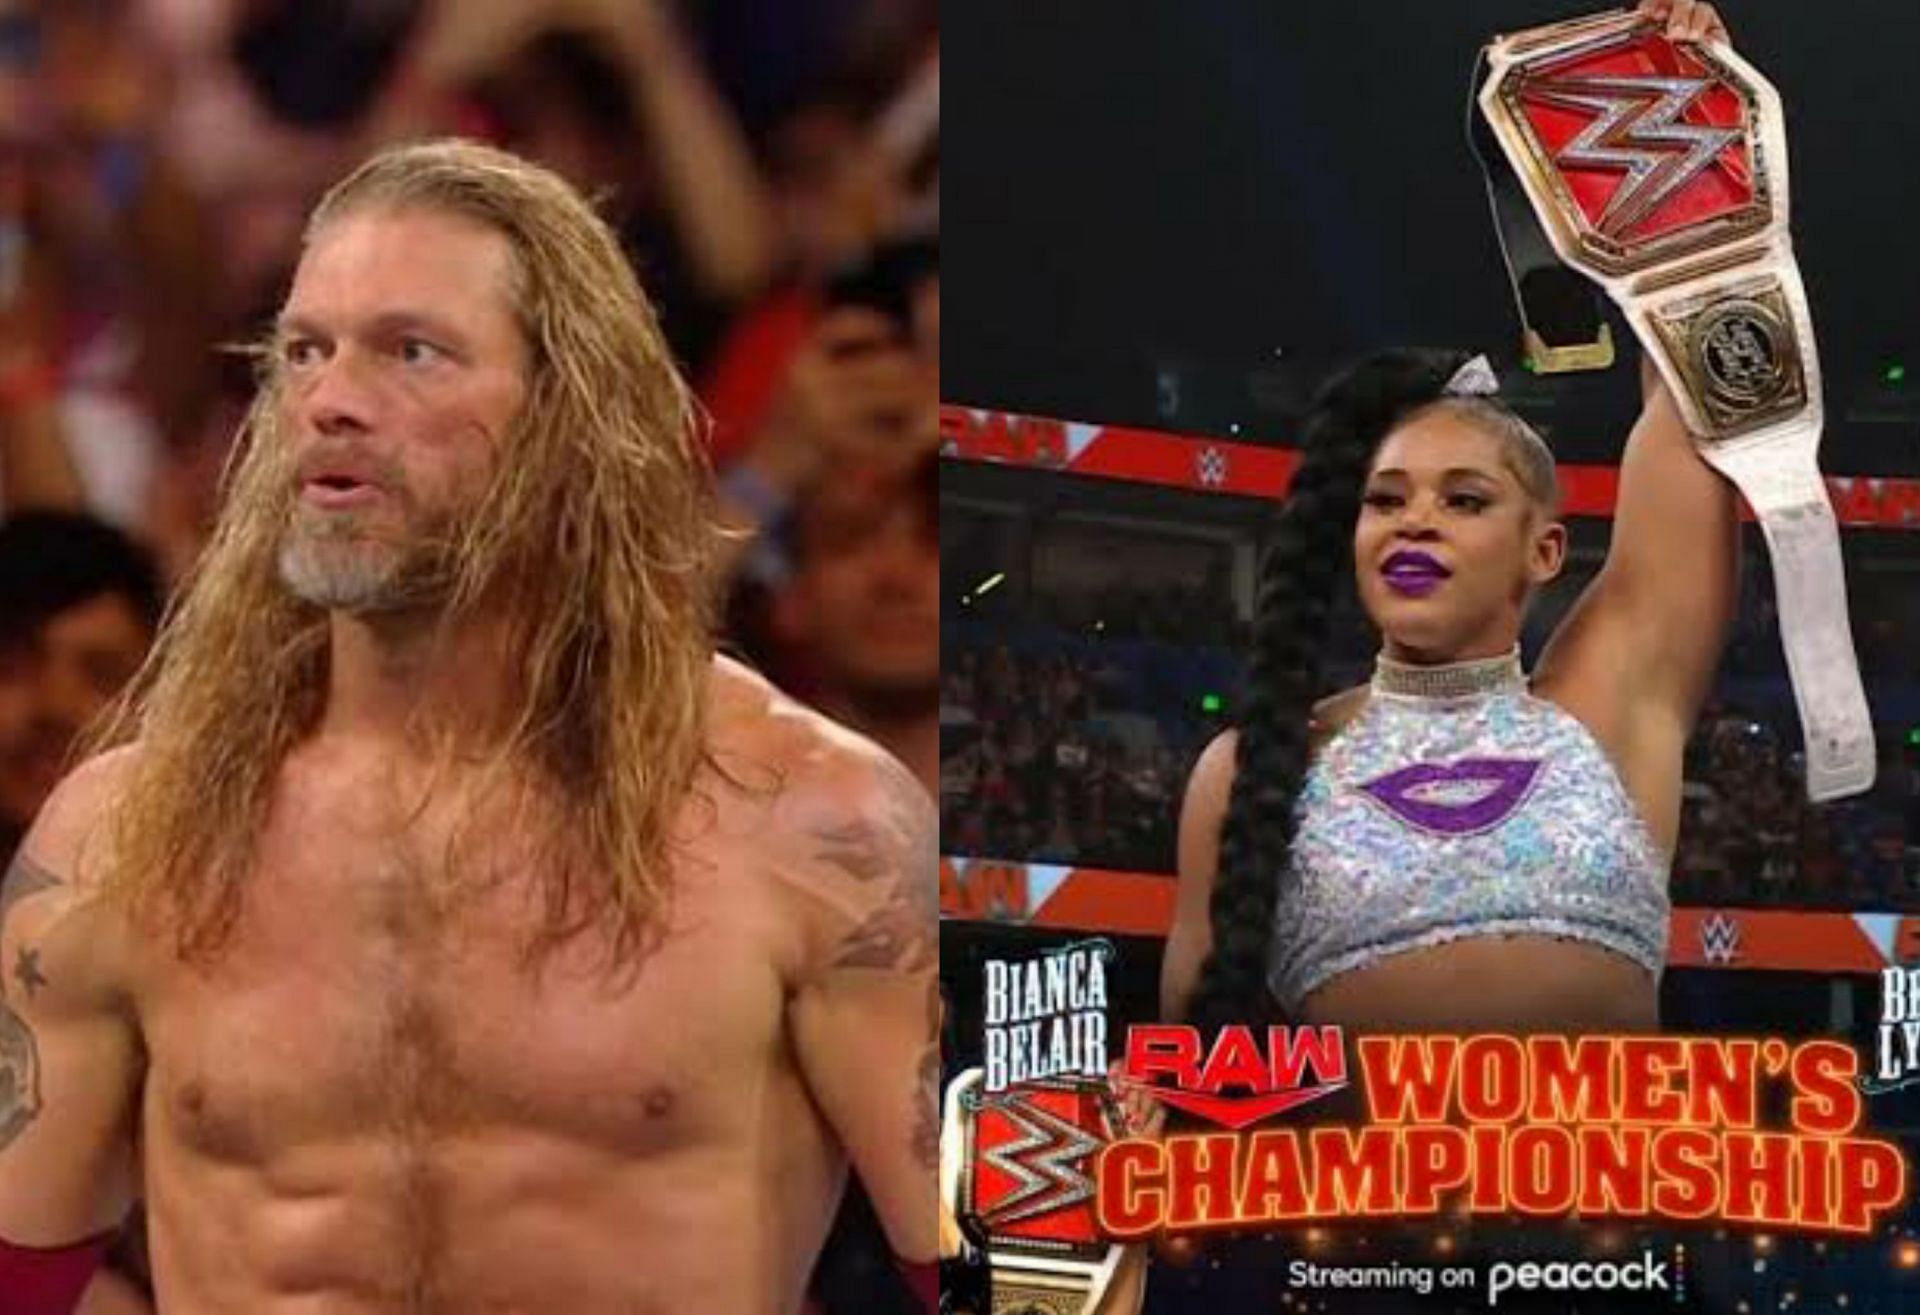 What will the fallout episode of RAW following SummerSlam have in store for us?